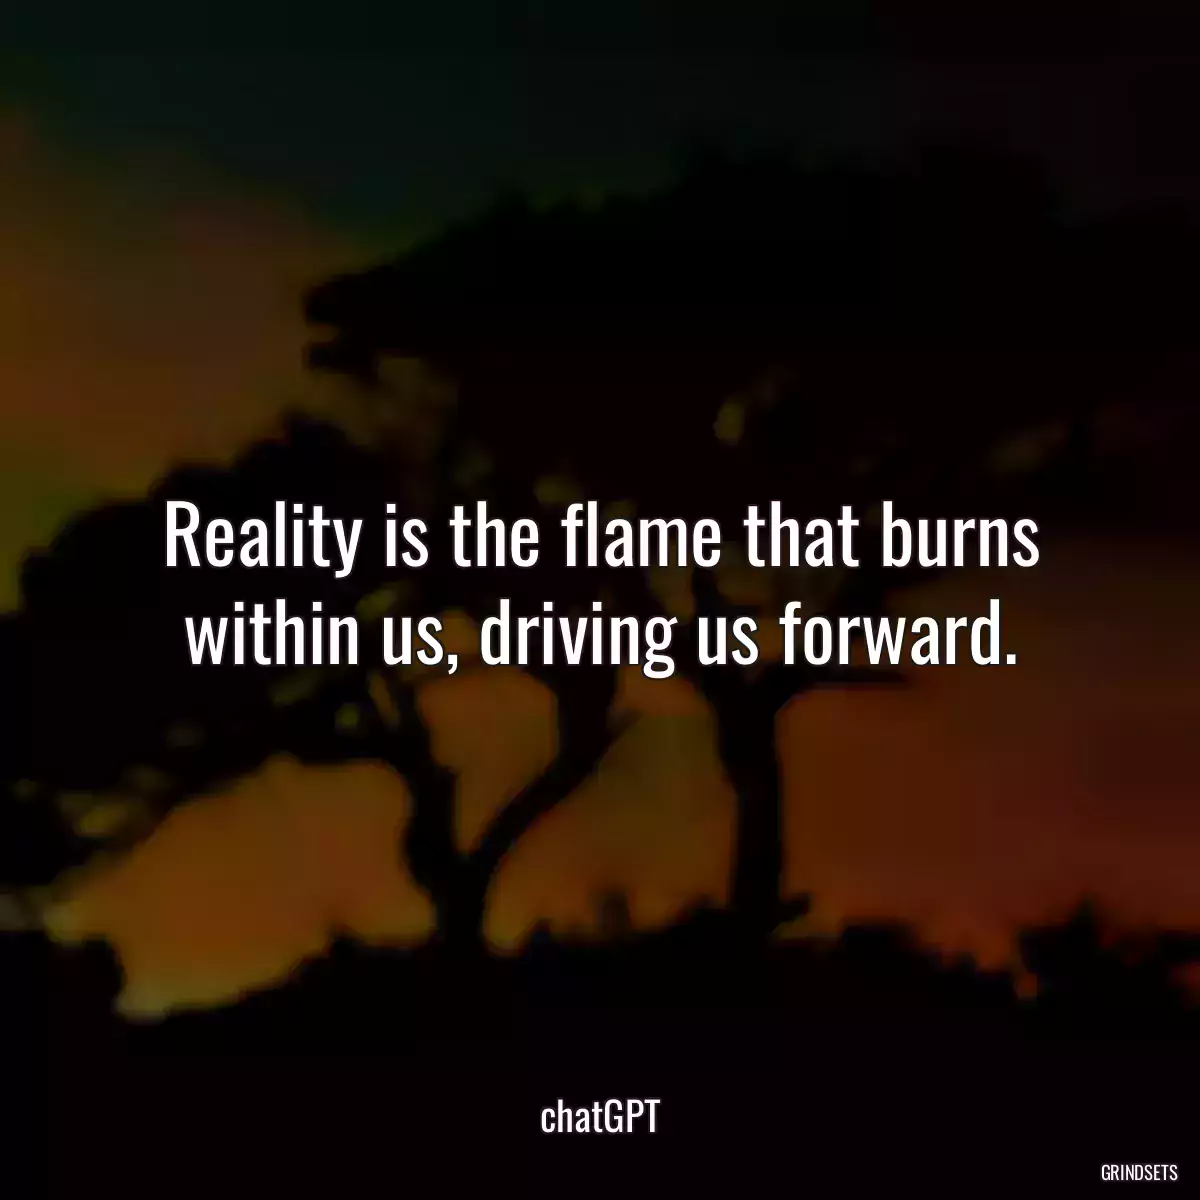 Reality is the flame that burns within us, driving us forward.